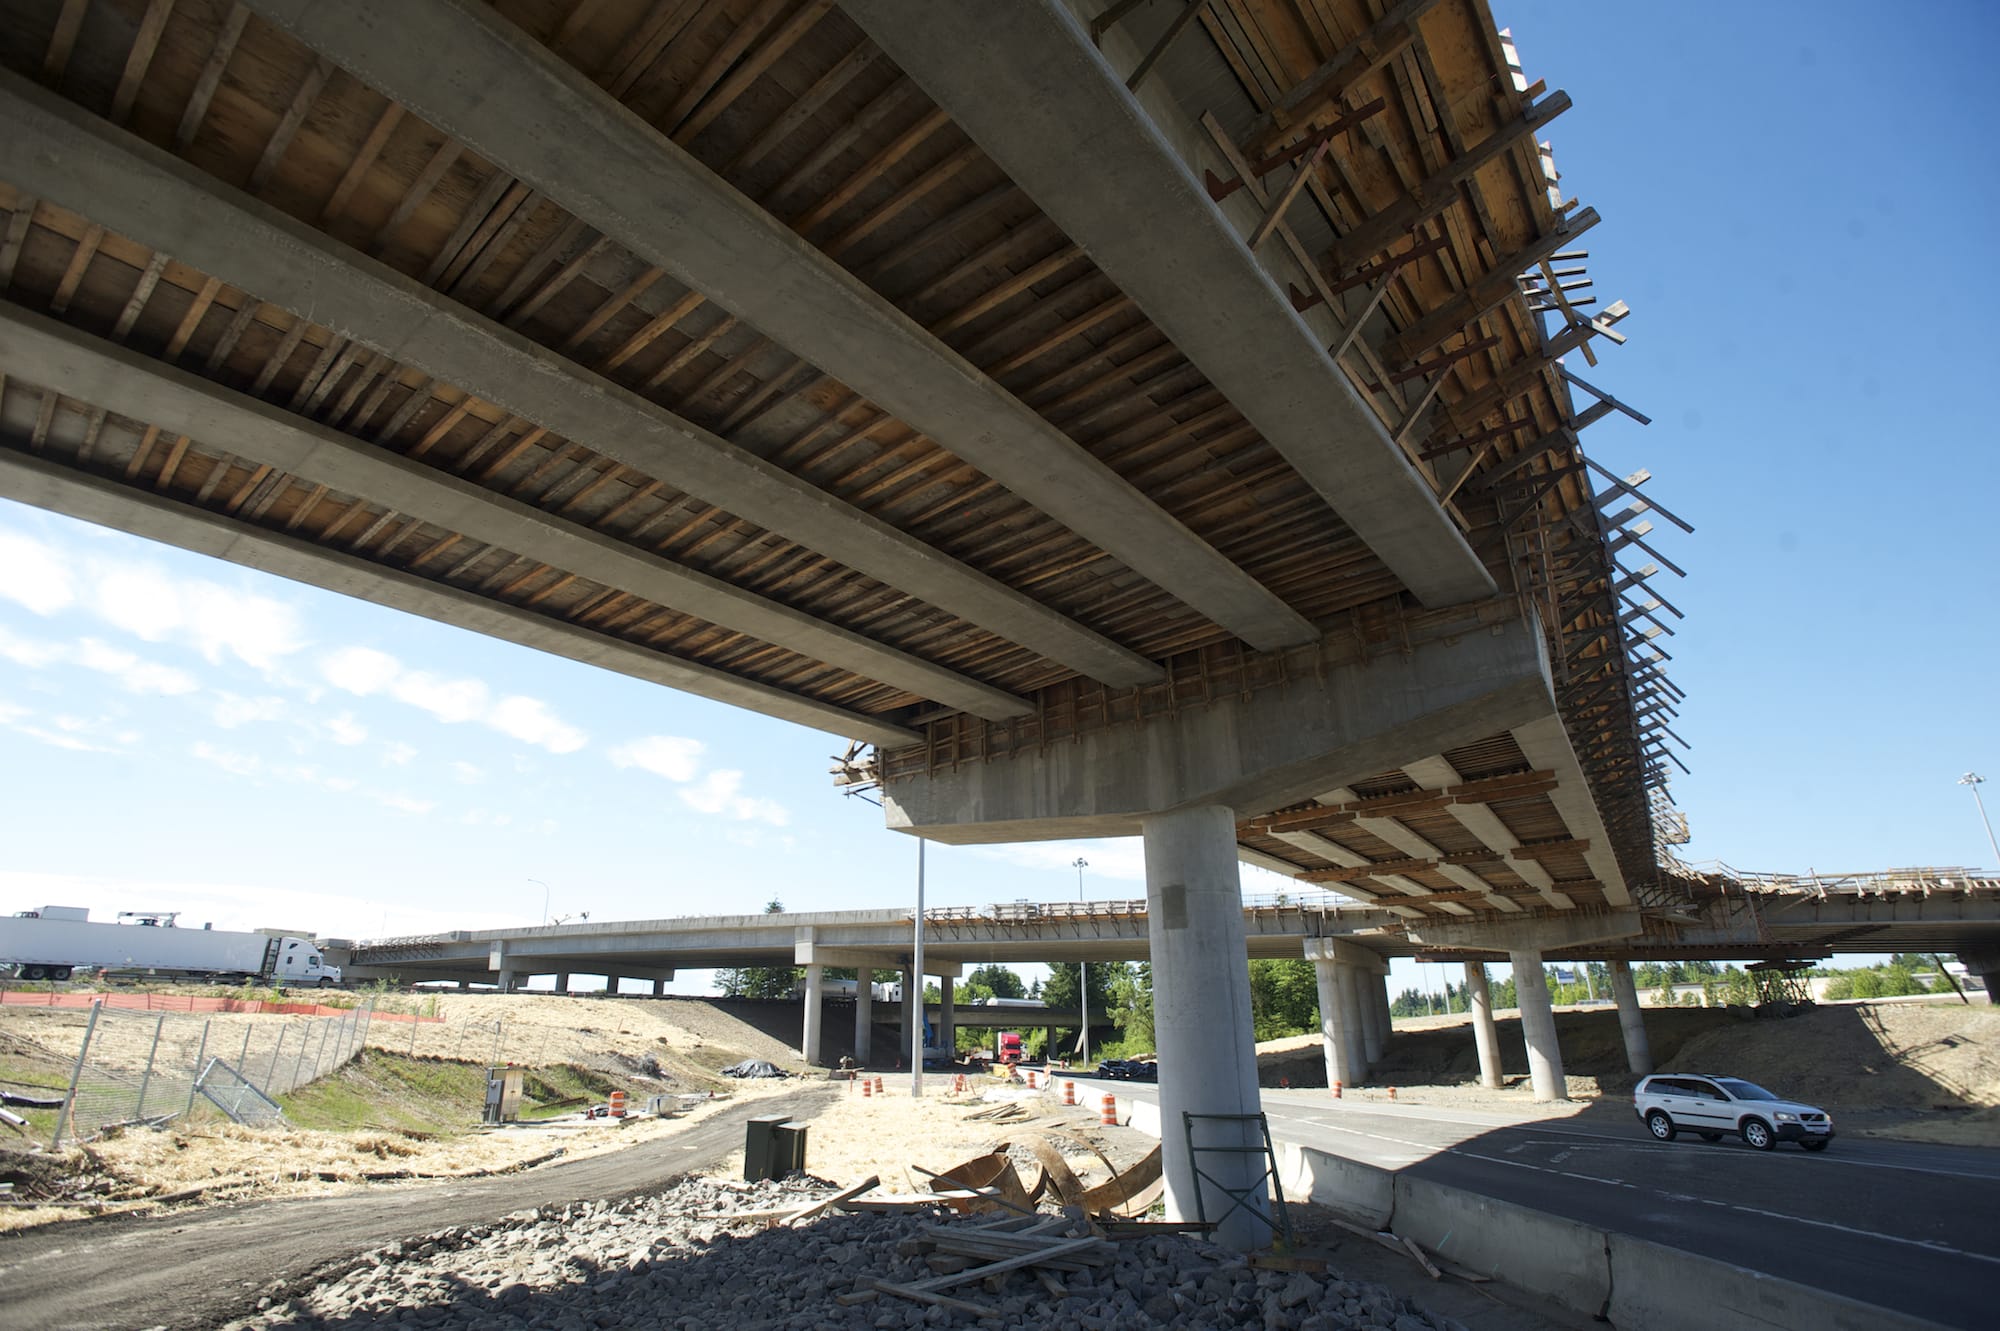 As the $133 million Salmon Creek interchange project nears completion, transportation officials are saying there will be very few major transportation projects in the future for Southwest Washington.